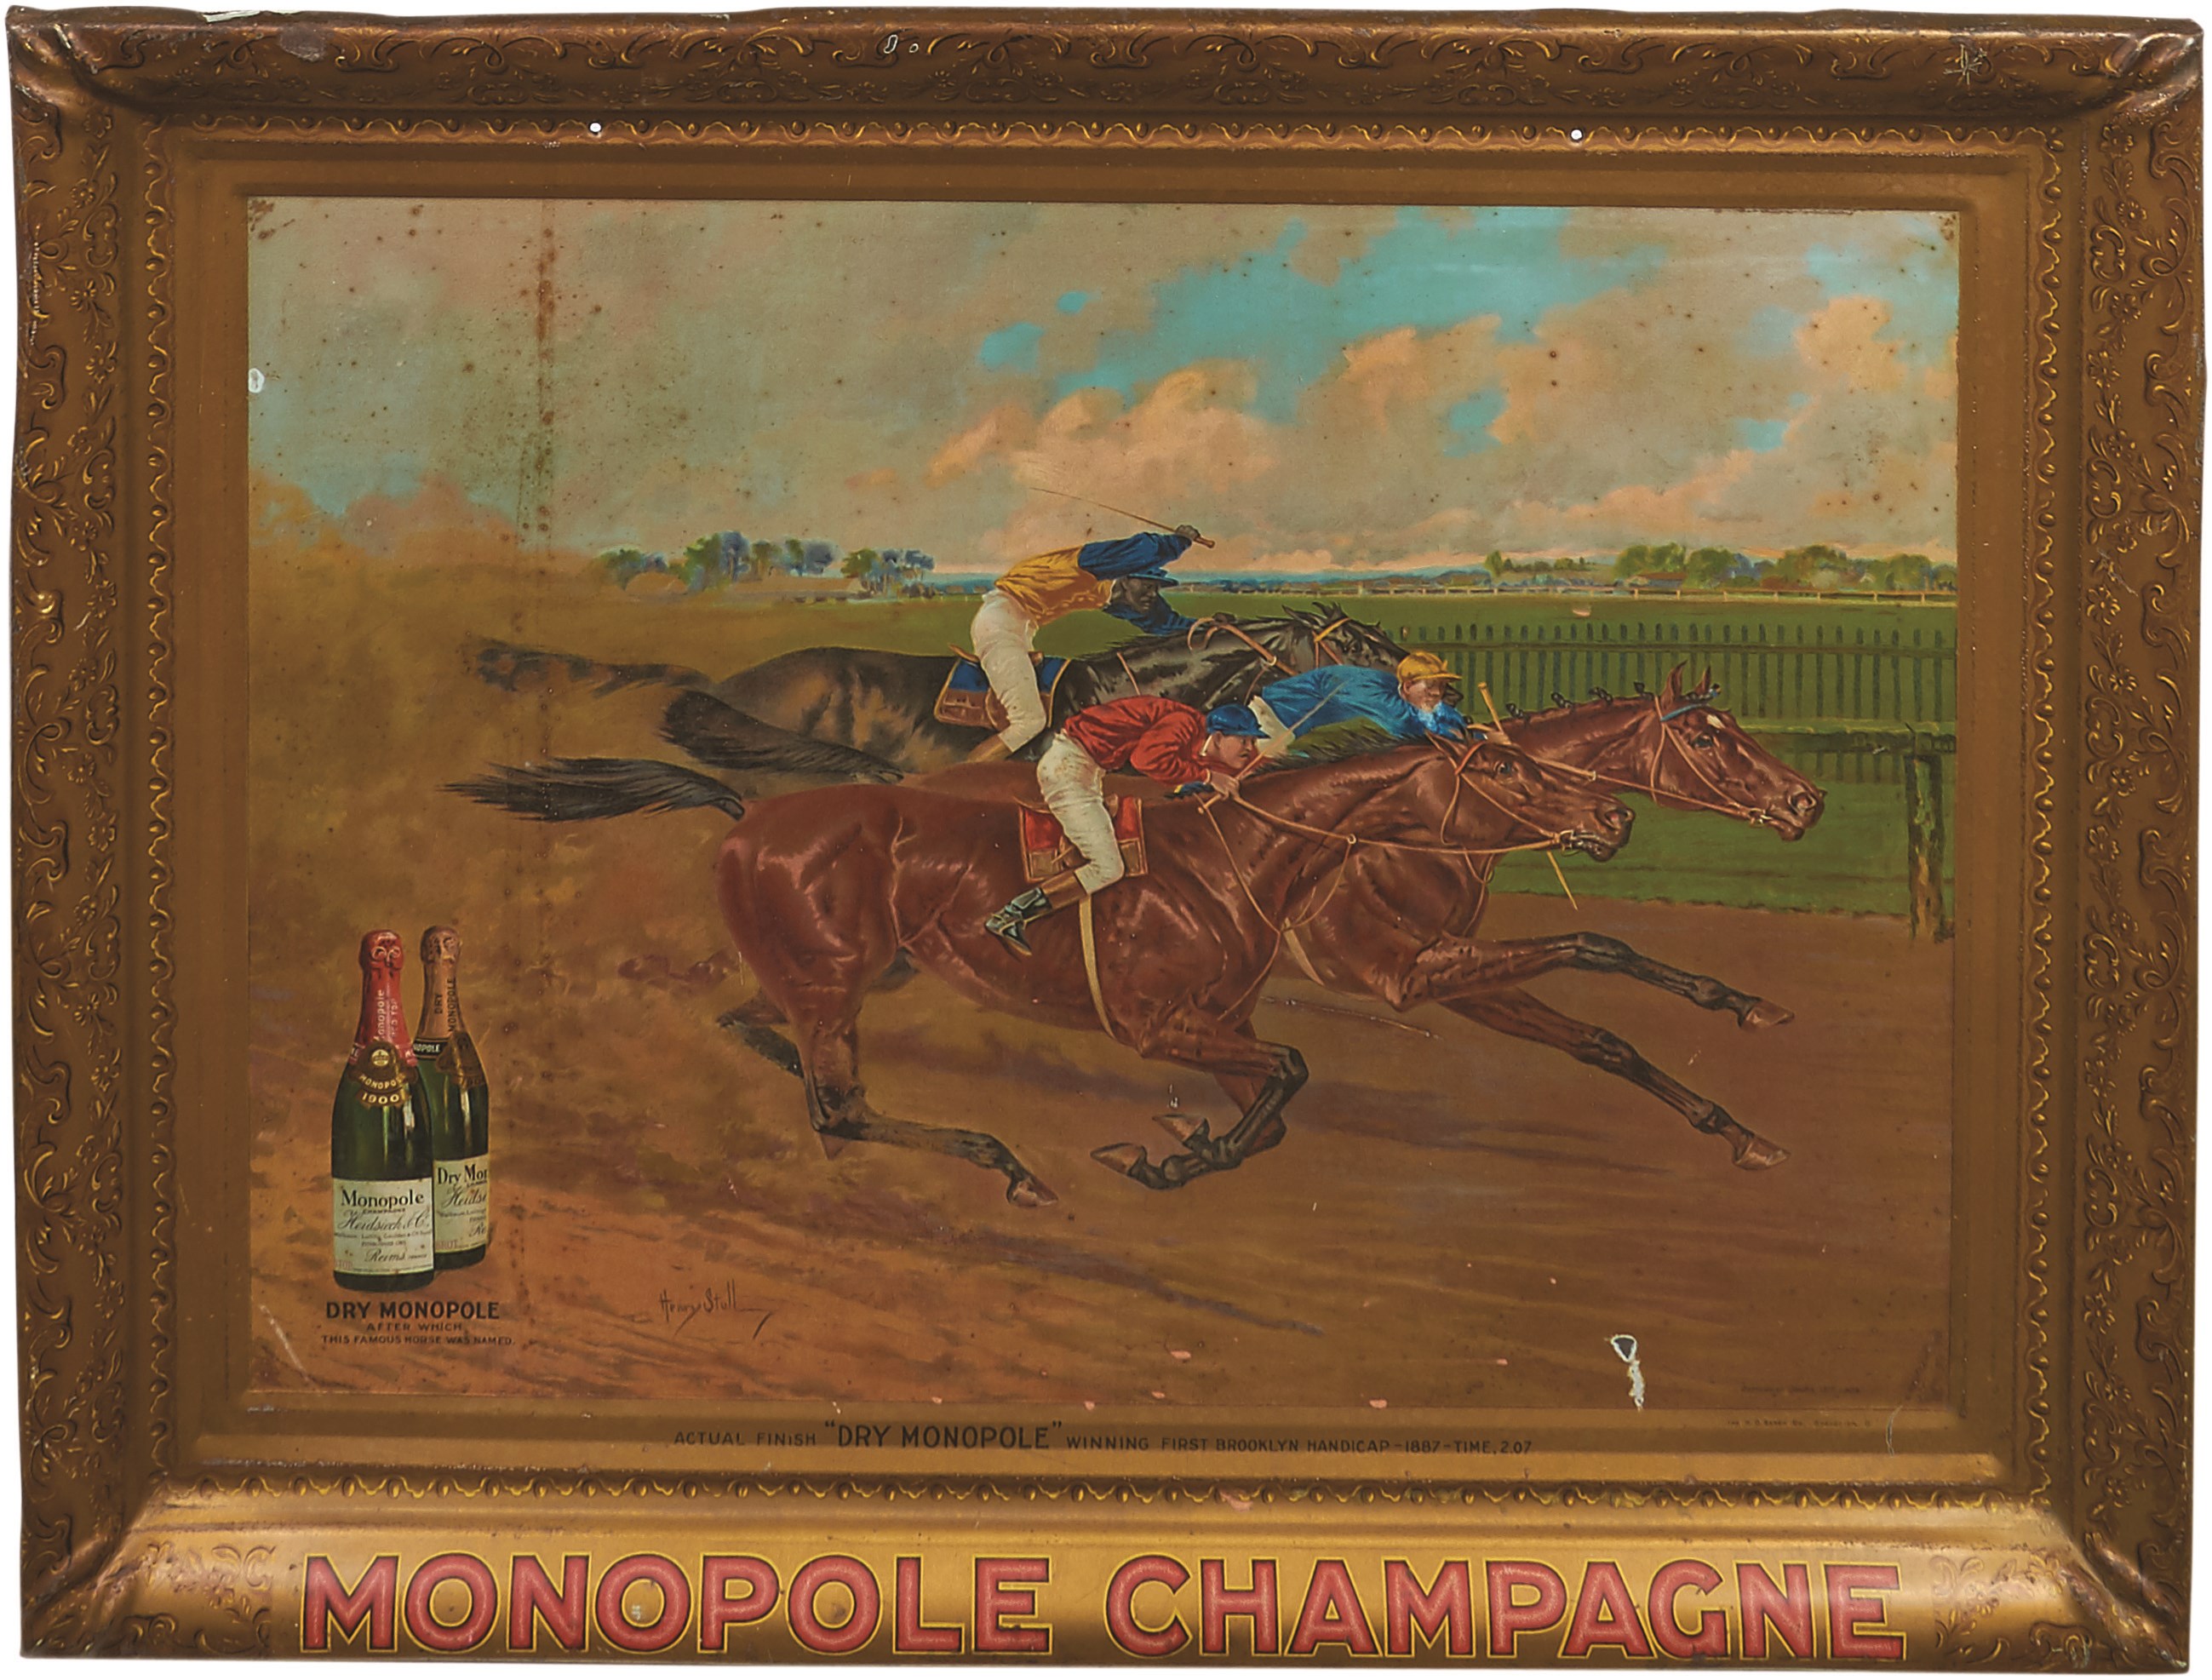 Horse Racing - Early Monopole Champagne Tin Advertising Sign by Henry Stull